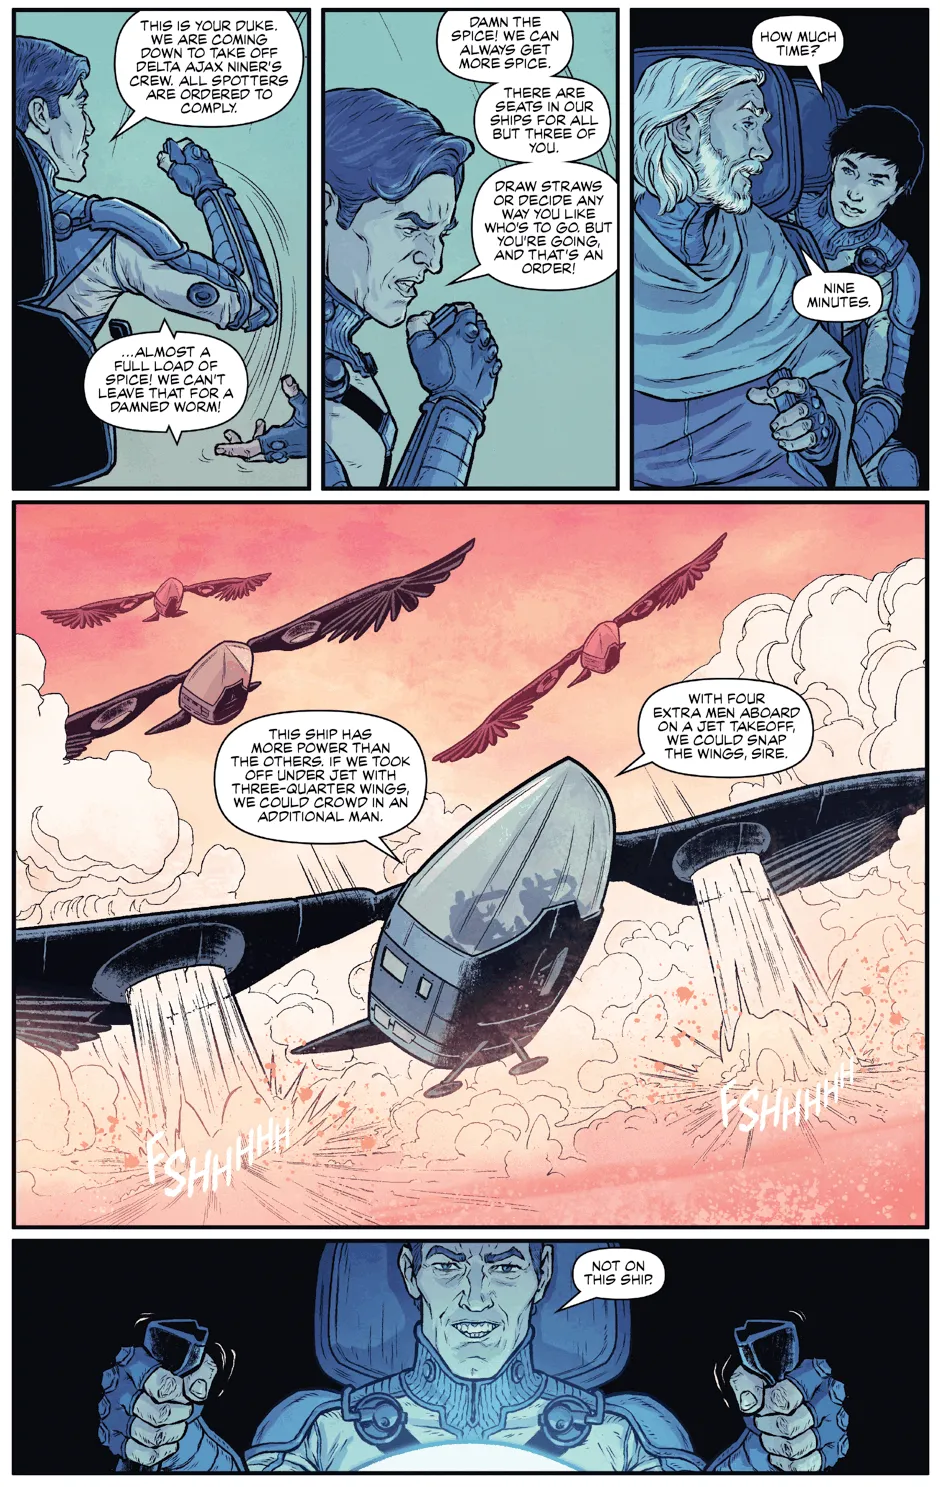 Page 83 of Dune: The Graphic Novel, adapted by Brian Herbert and Kevin J. Anderson, illustrated by Raúl Allen and Patricia Martín, published by Abrams ComicArts © 2020 Herbert Properties LLC